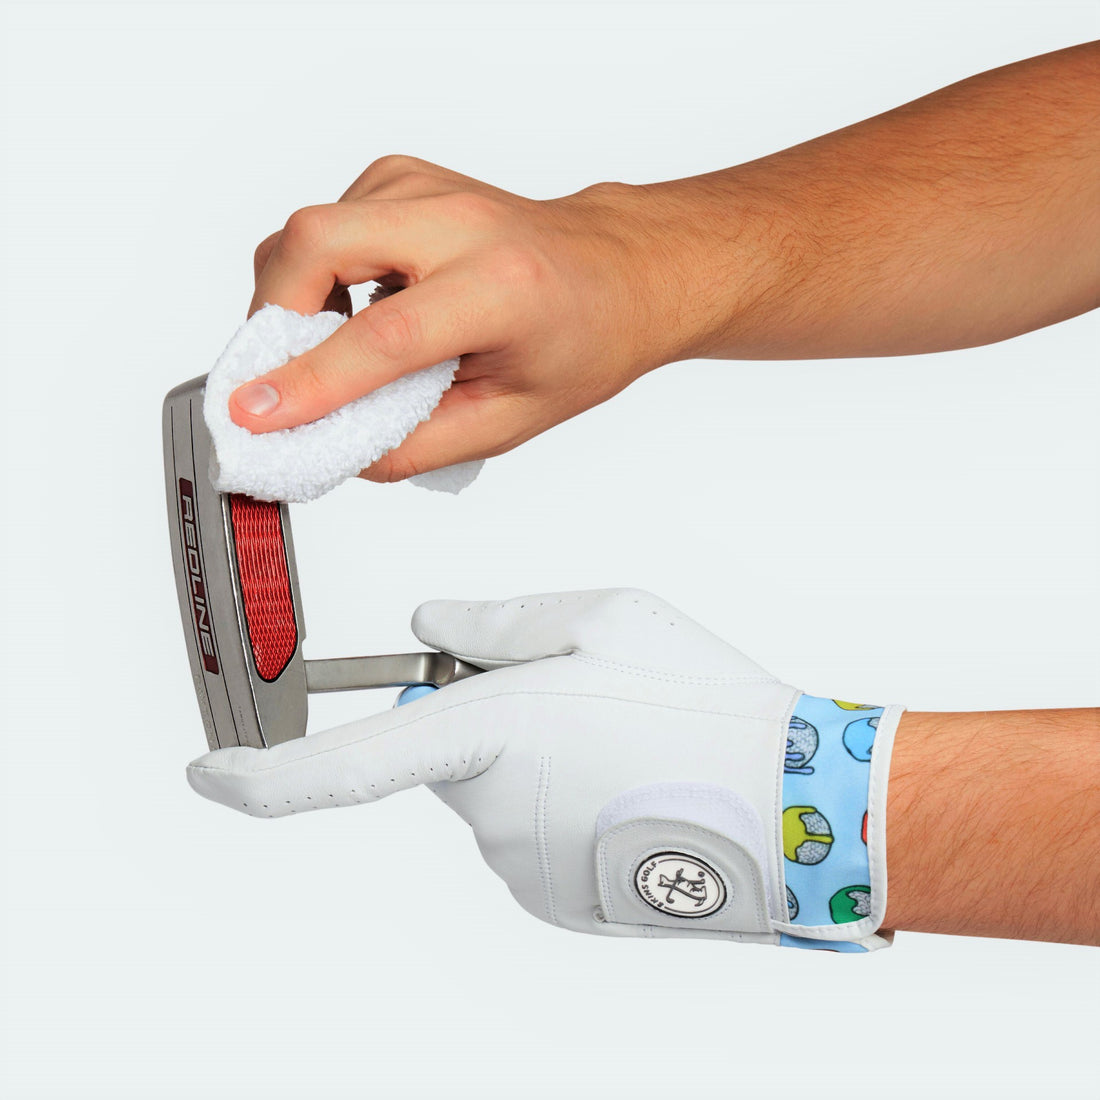 6 Tips To Take Care Of Your Golf Glove